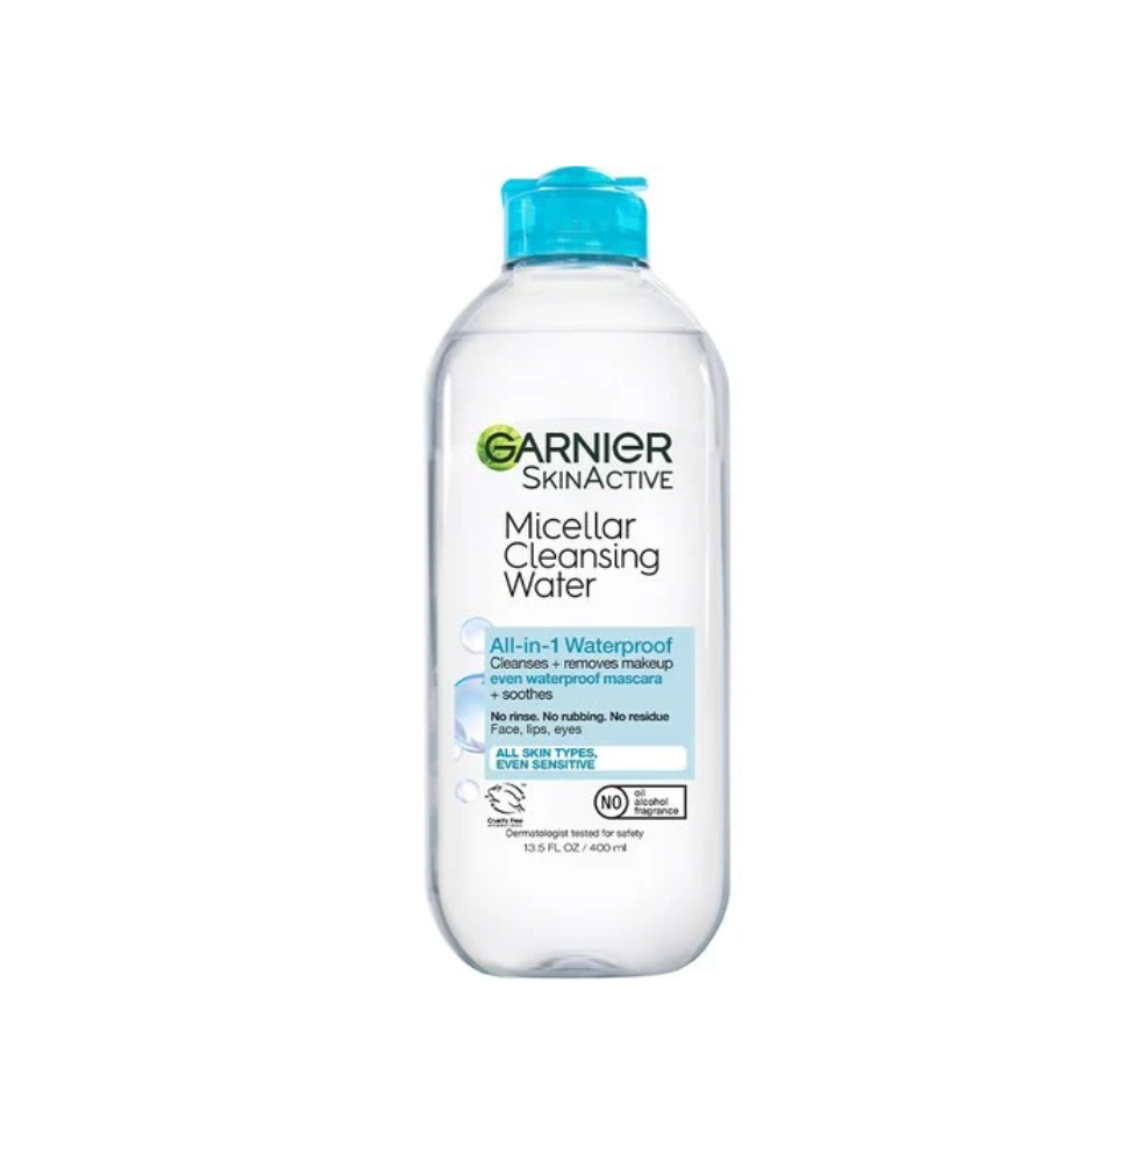 Micellar Cleansing Water All-in-1 Waterproof Makeup Remover